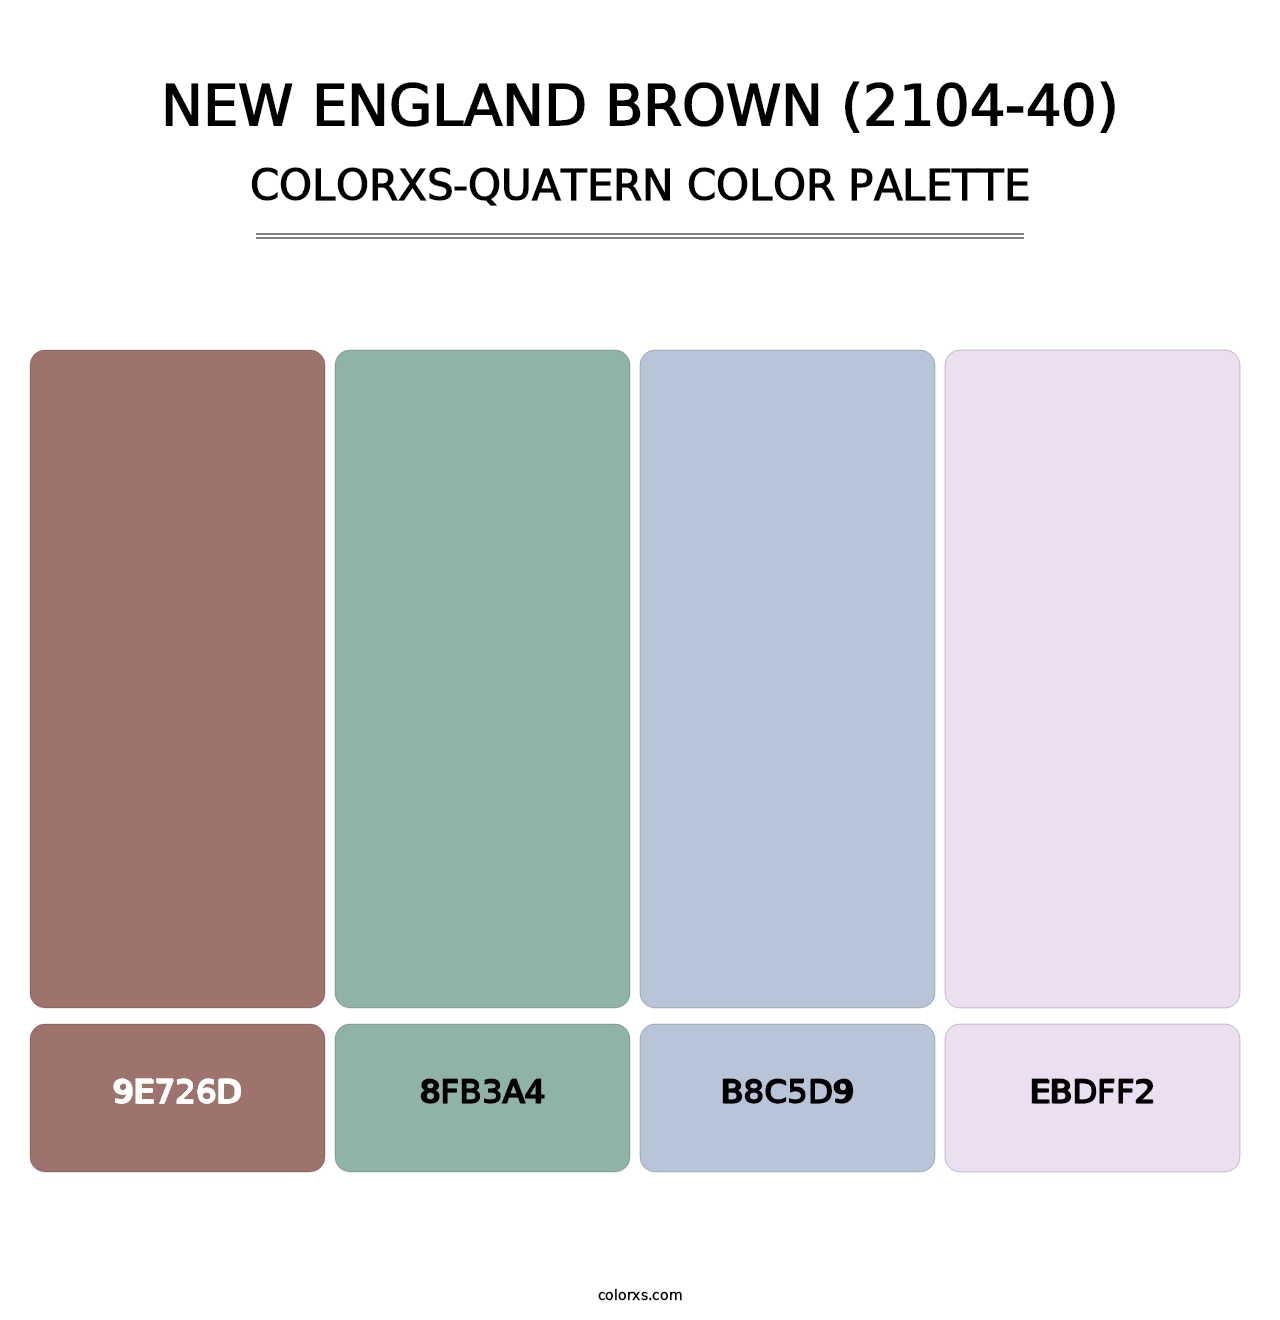 New England Brown (2104-40) - Colorxs Quatern Palette